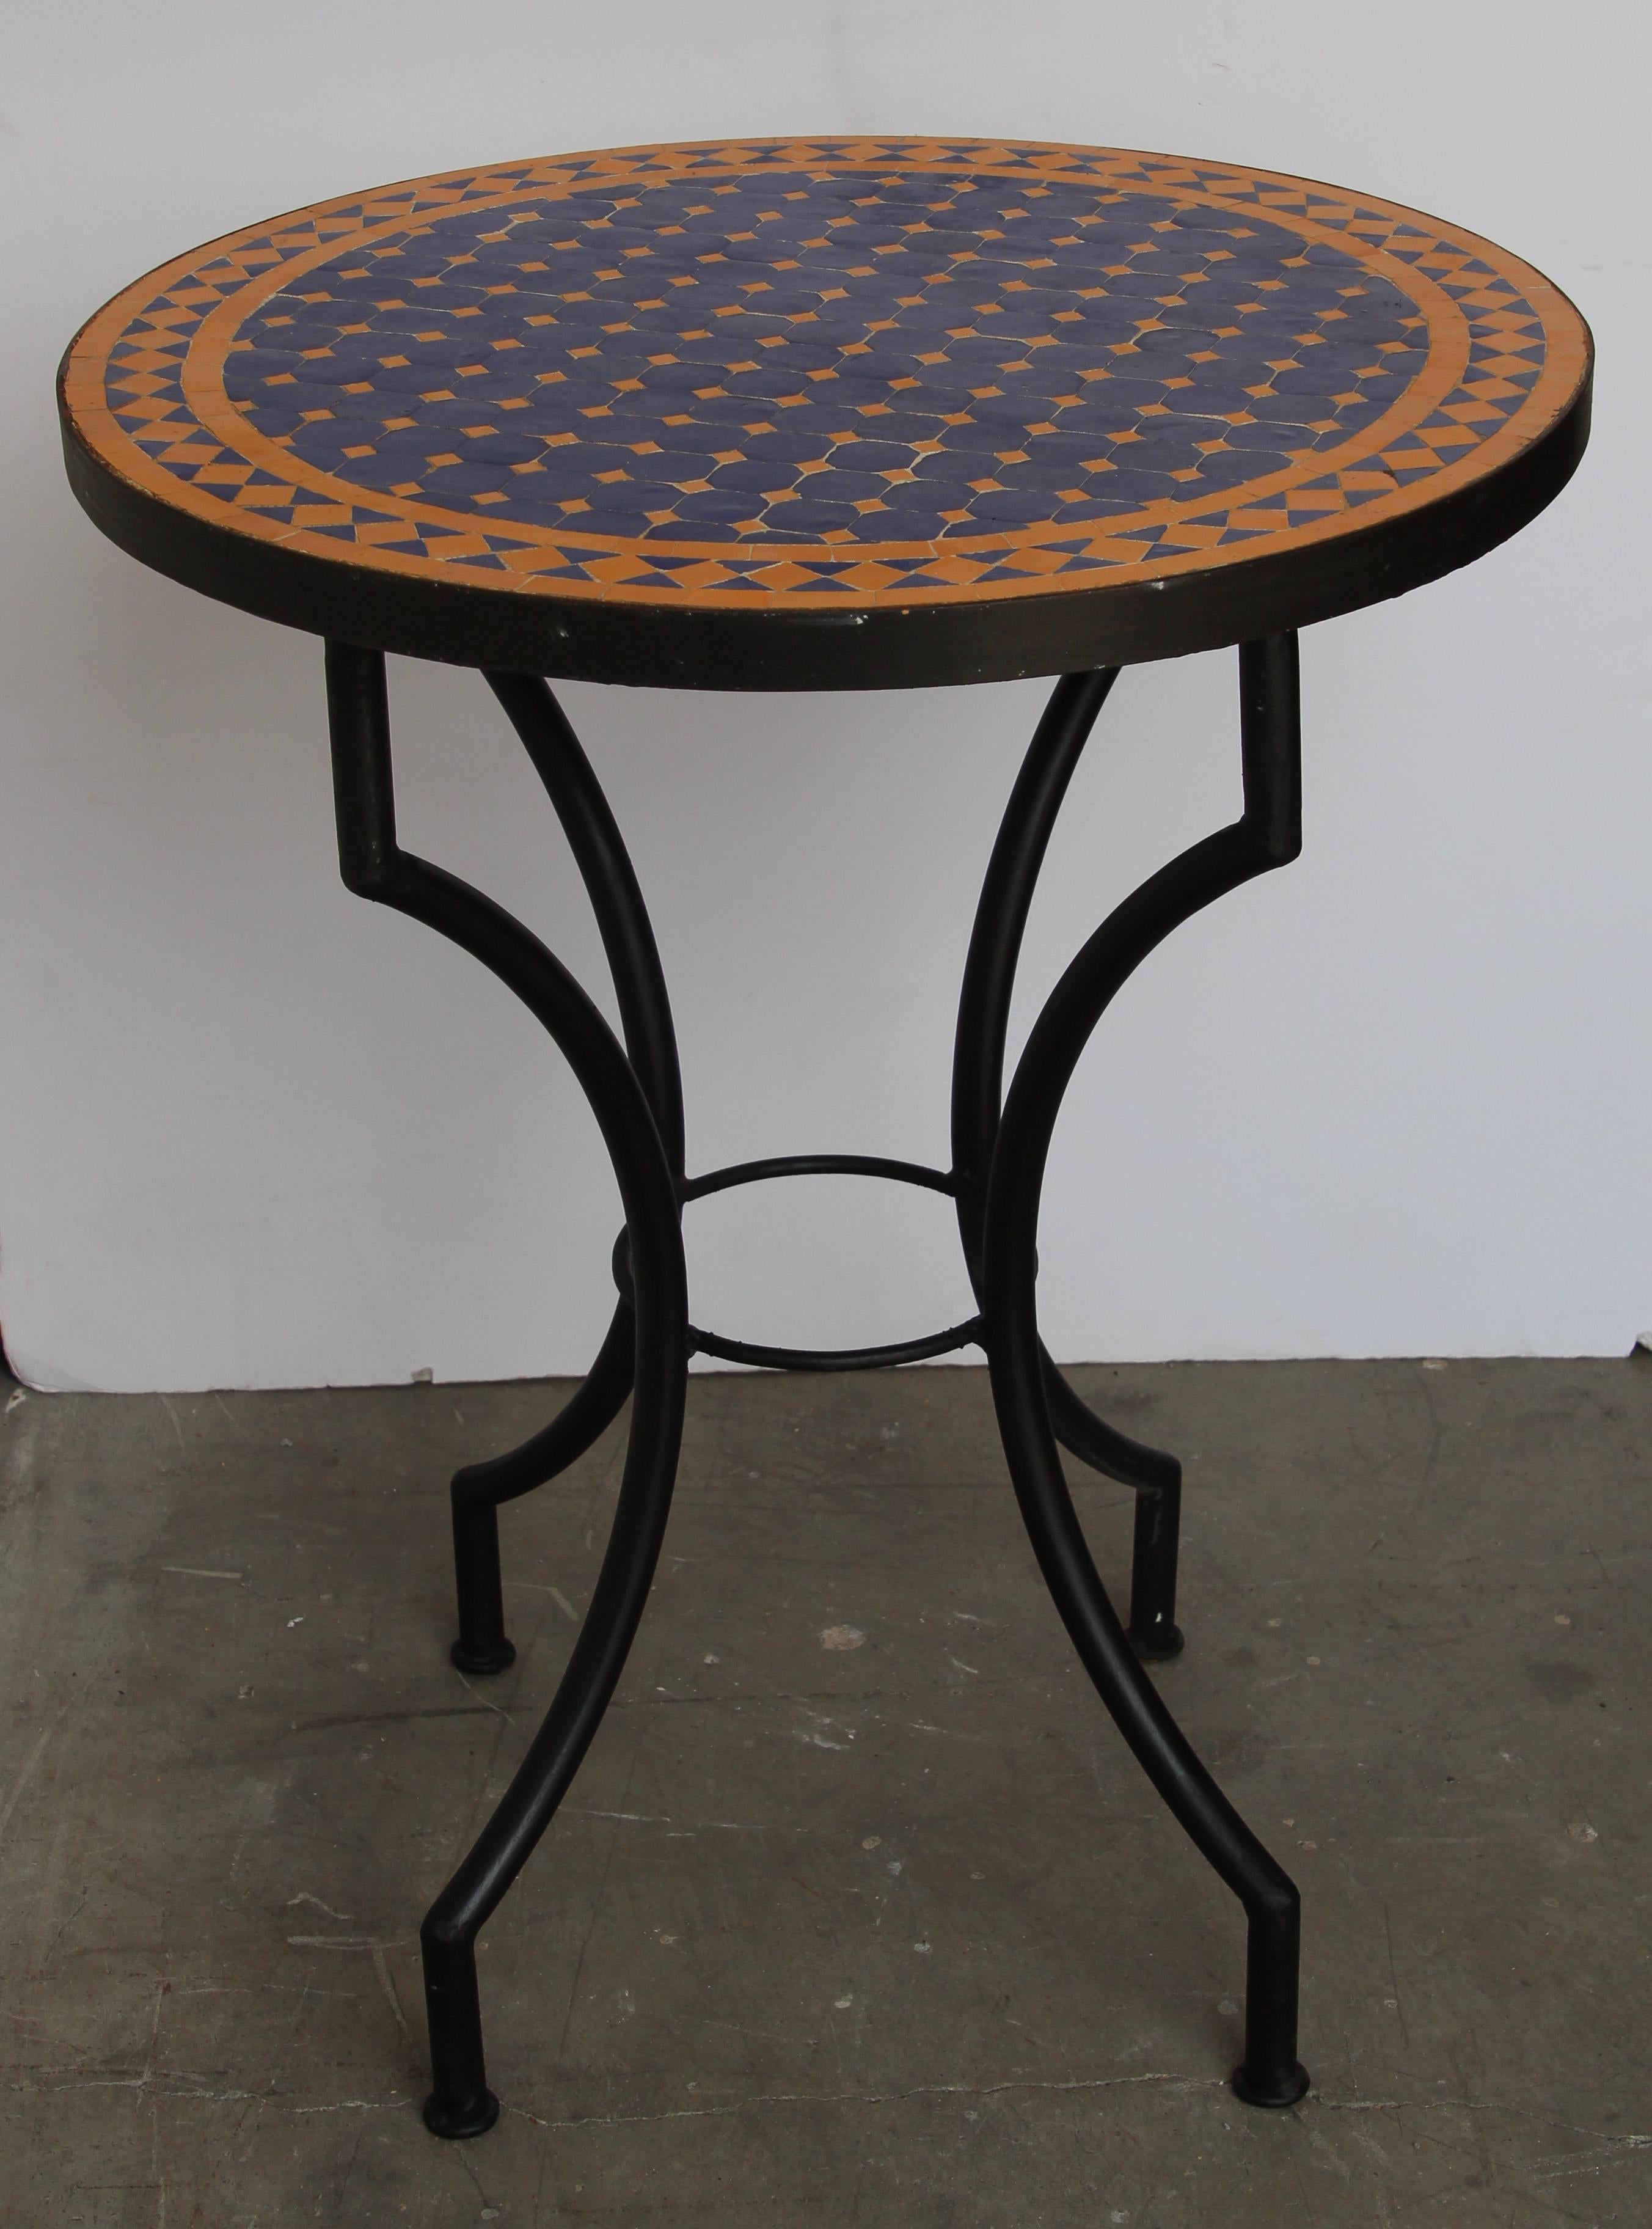 Moroccan mosaic tiles table on iron base.
Handmade by expert artisans in Fez, Morocco using reclaimed old glazed cobalt blue and yellow colors tiles inlaid in concrete using reclaimed old glazed tiles and making beautiful geometrical designs,